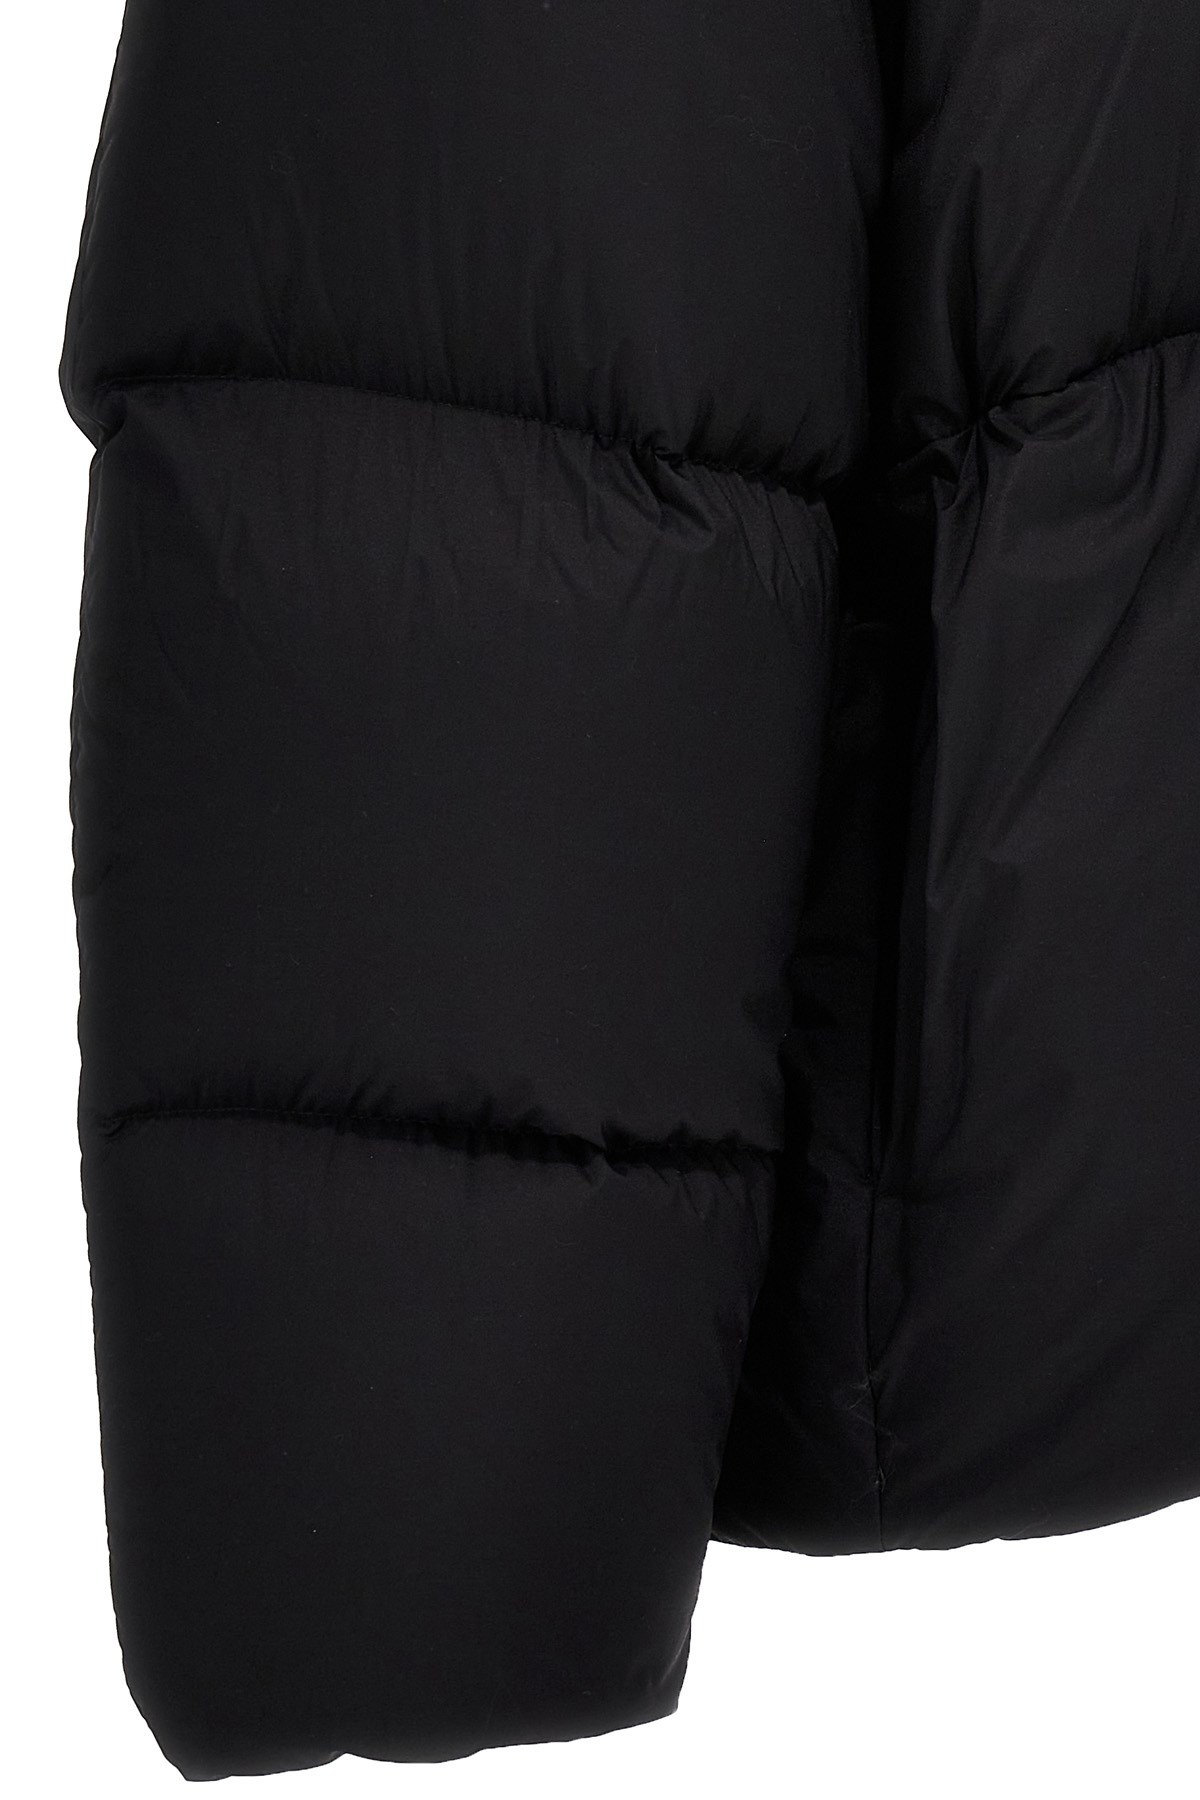 Moncler Genius Roc Nation by Jay-Z down jacket - 5